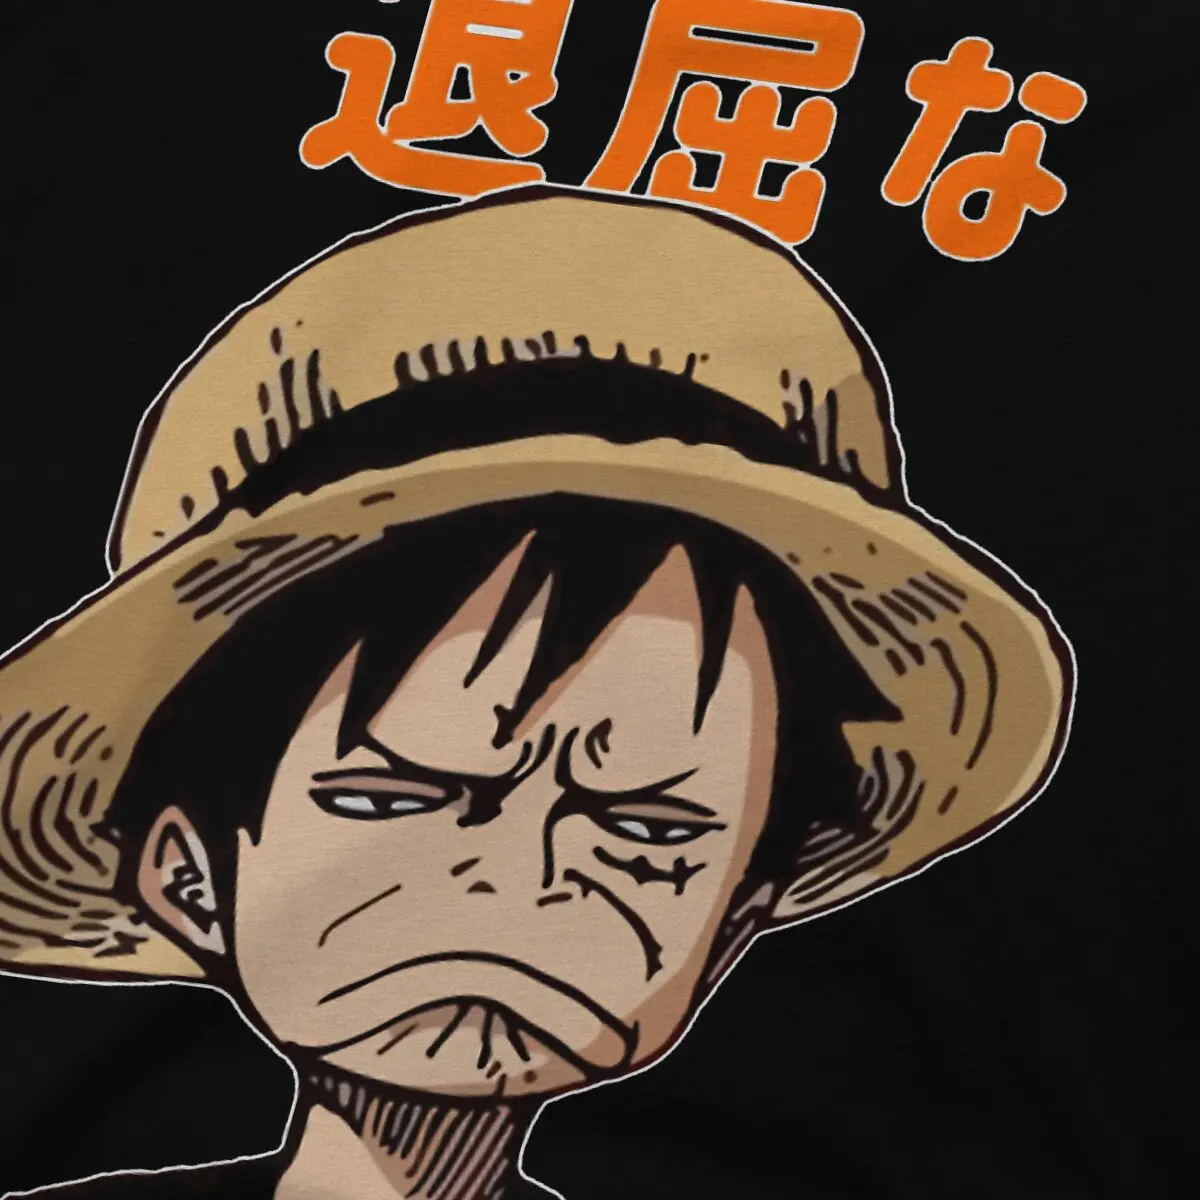 Luffy Funny Face TShirt For Male ONE PIECE Clothing Novelty Polyester T Shirt Homme